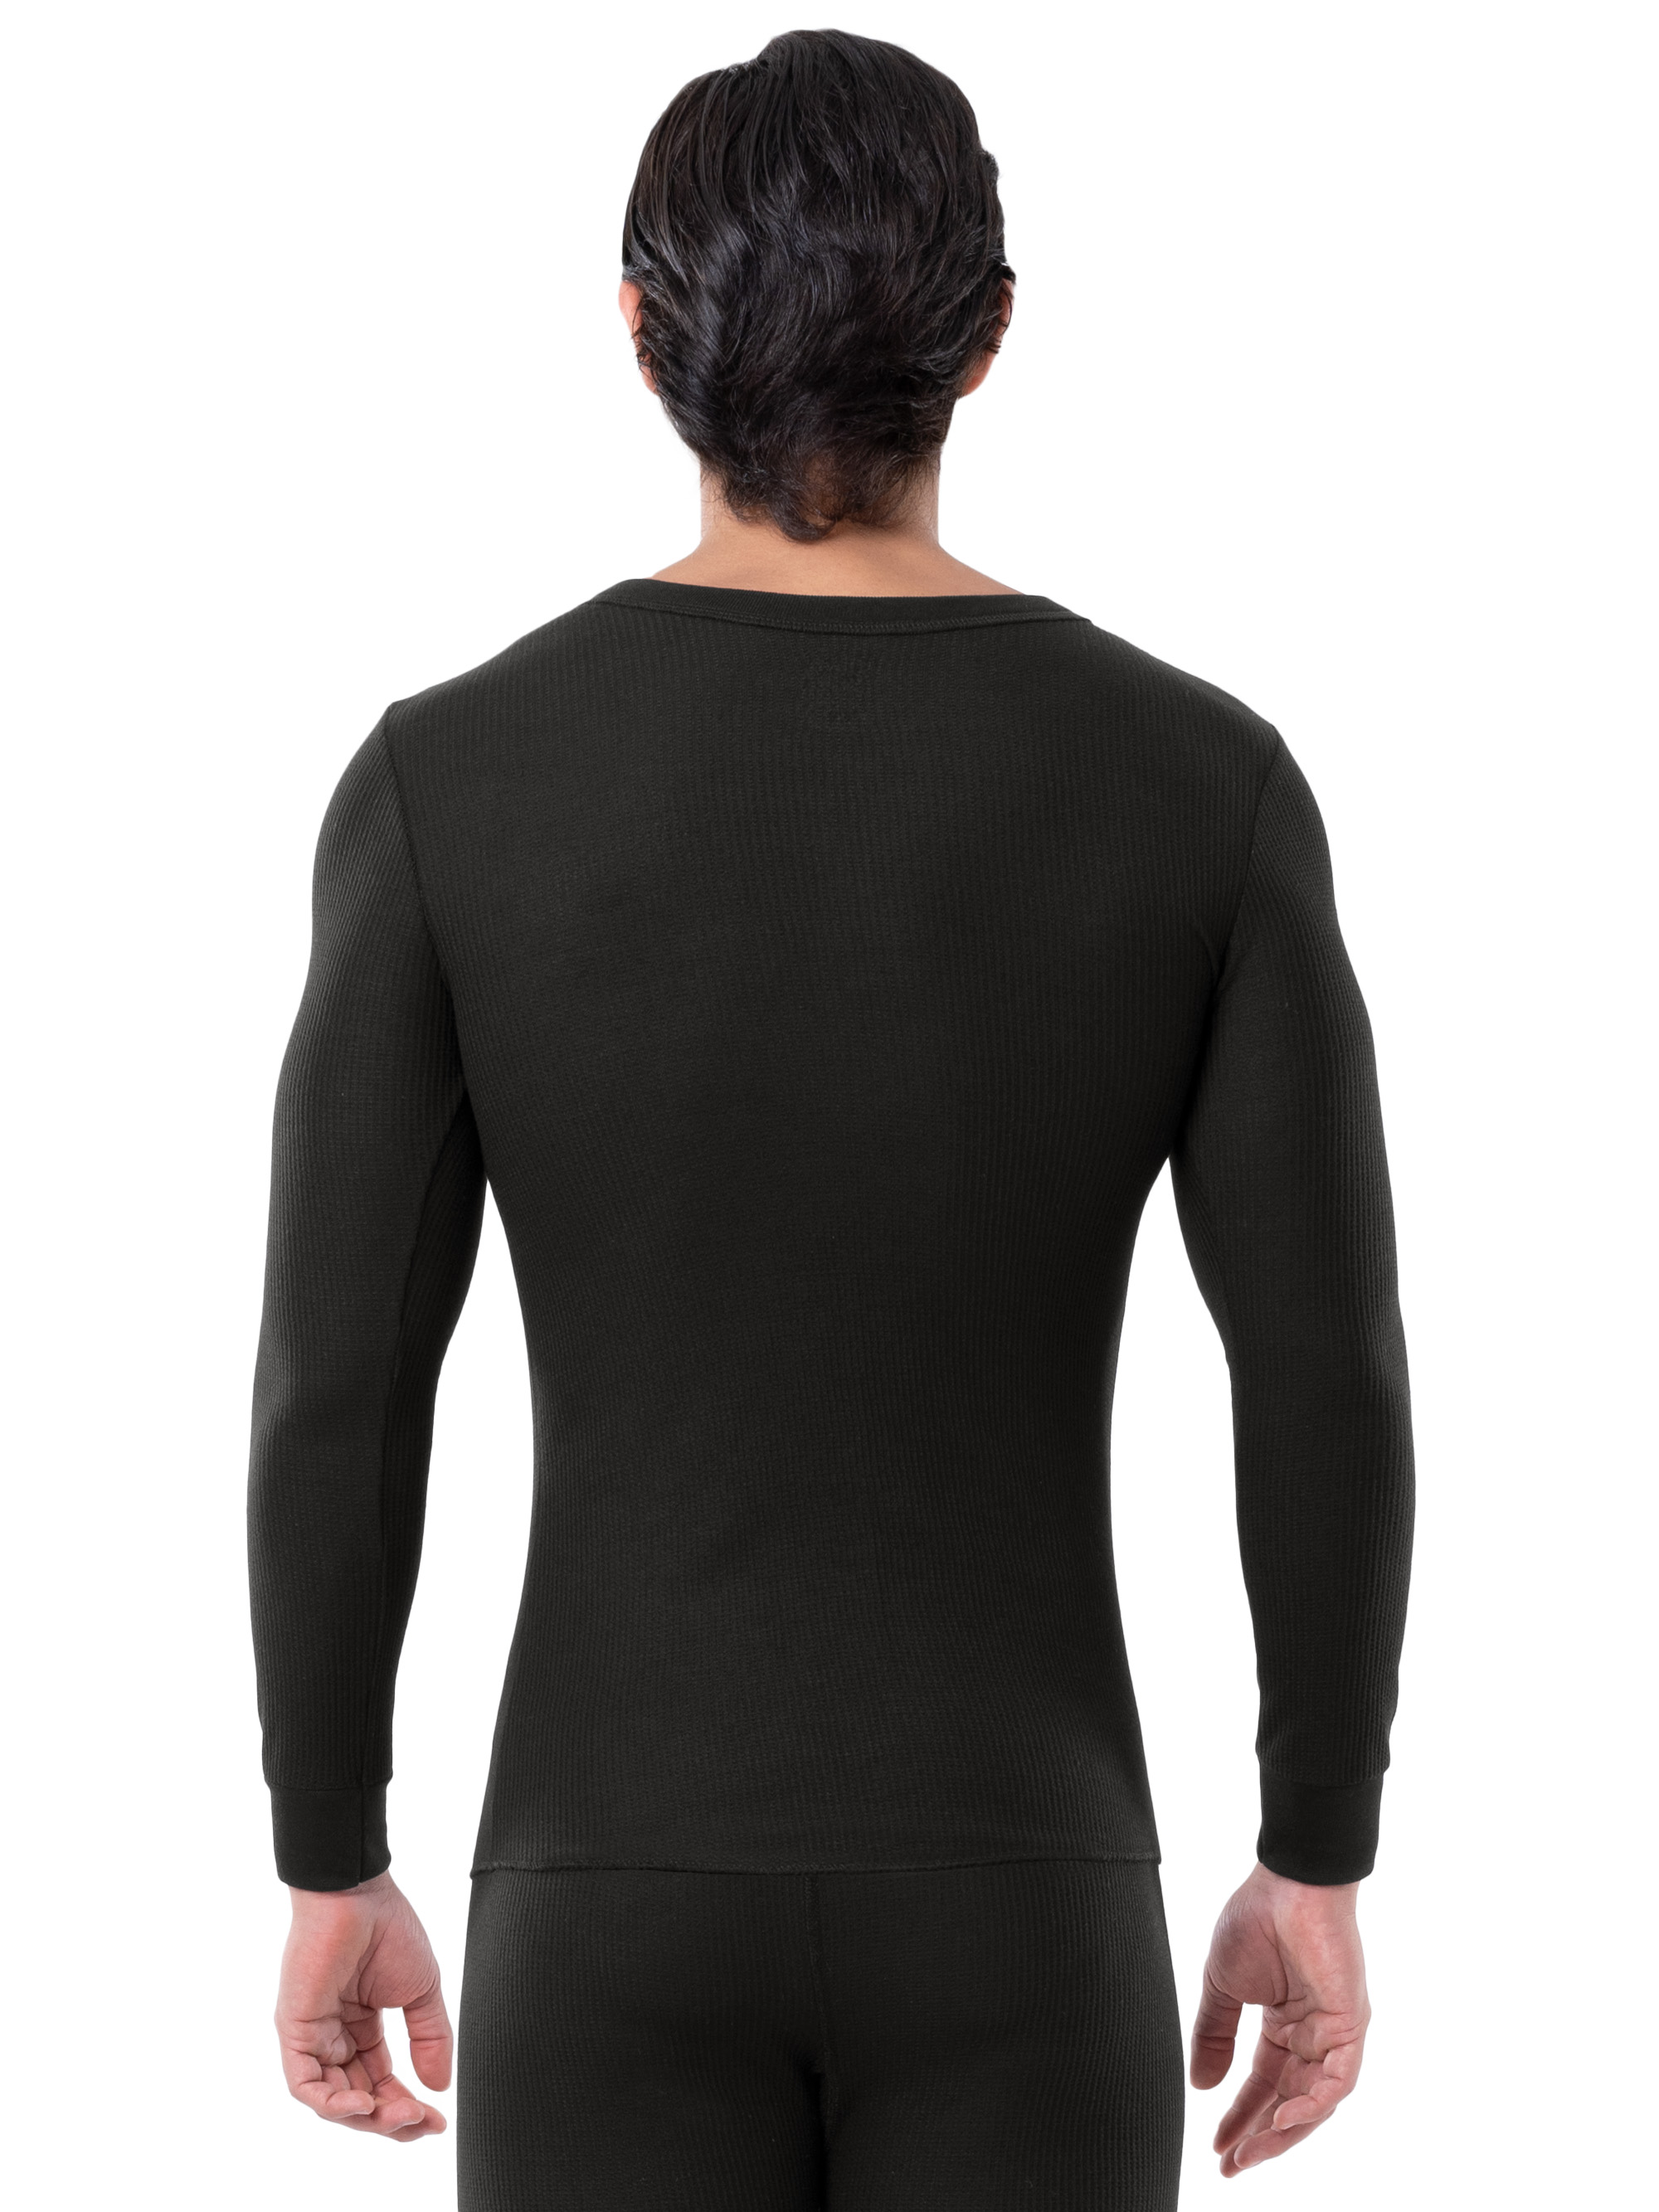 Fruit of The loom Men's Waffle Baselayer Crew Neck Thermal Top - image 3 of 8